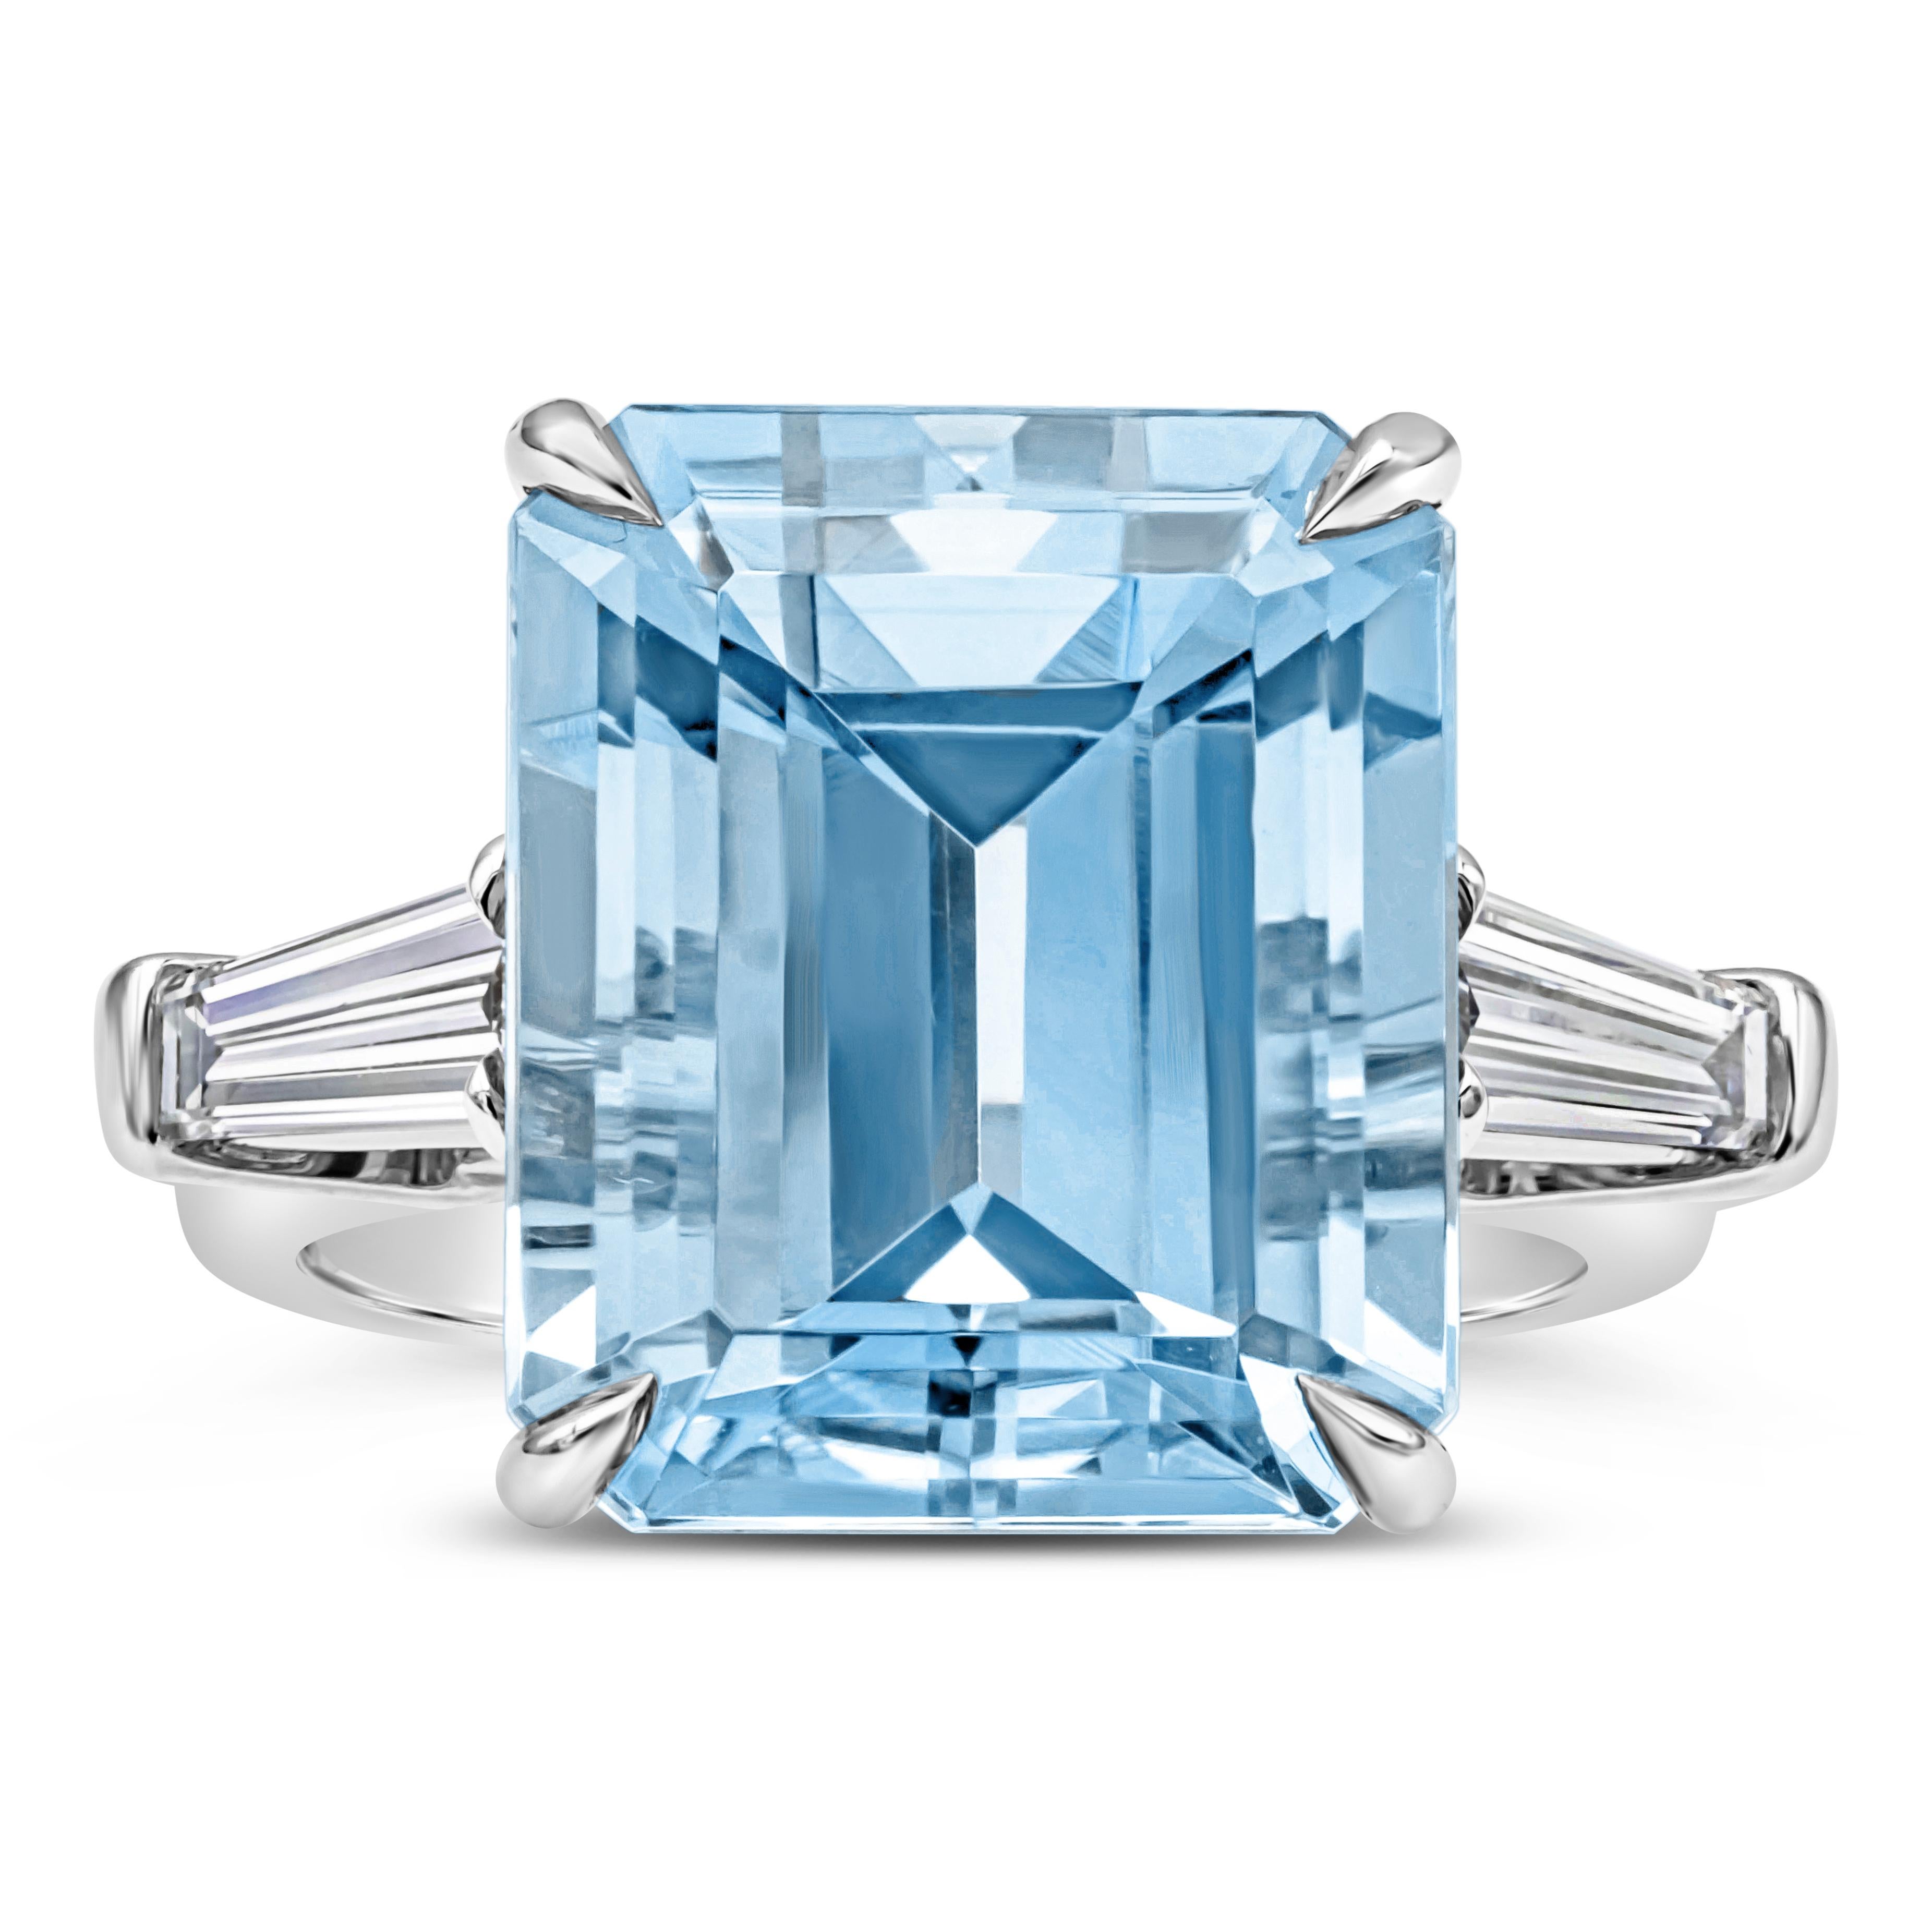 This gorgeous and sleek three stone engagement ring features a 9.73 carats emerald cut Santa-Maria blue aquamarine in the center. Flanked by two GIA certified brilliant baguette cut diamonds on each side weighing 0.78 carats total, E Color and